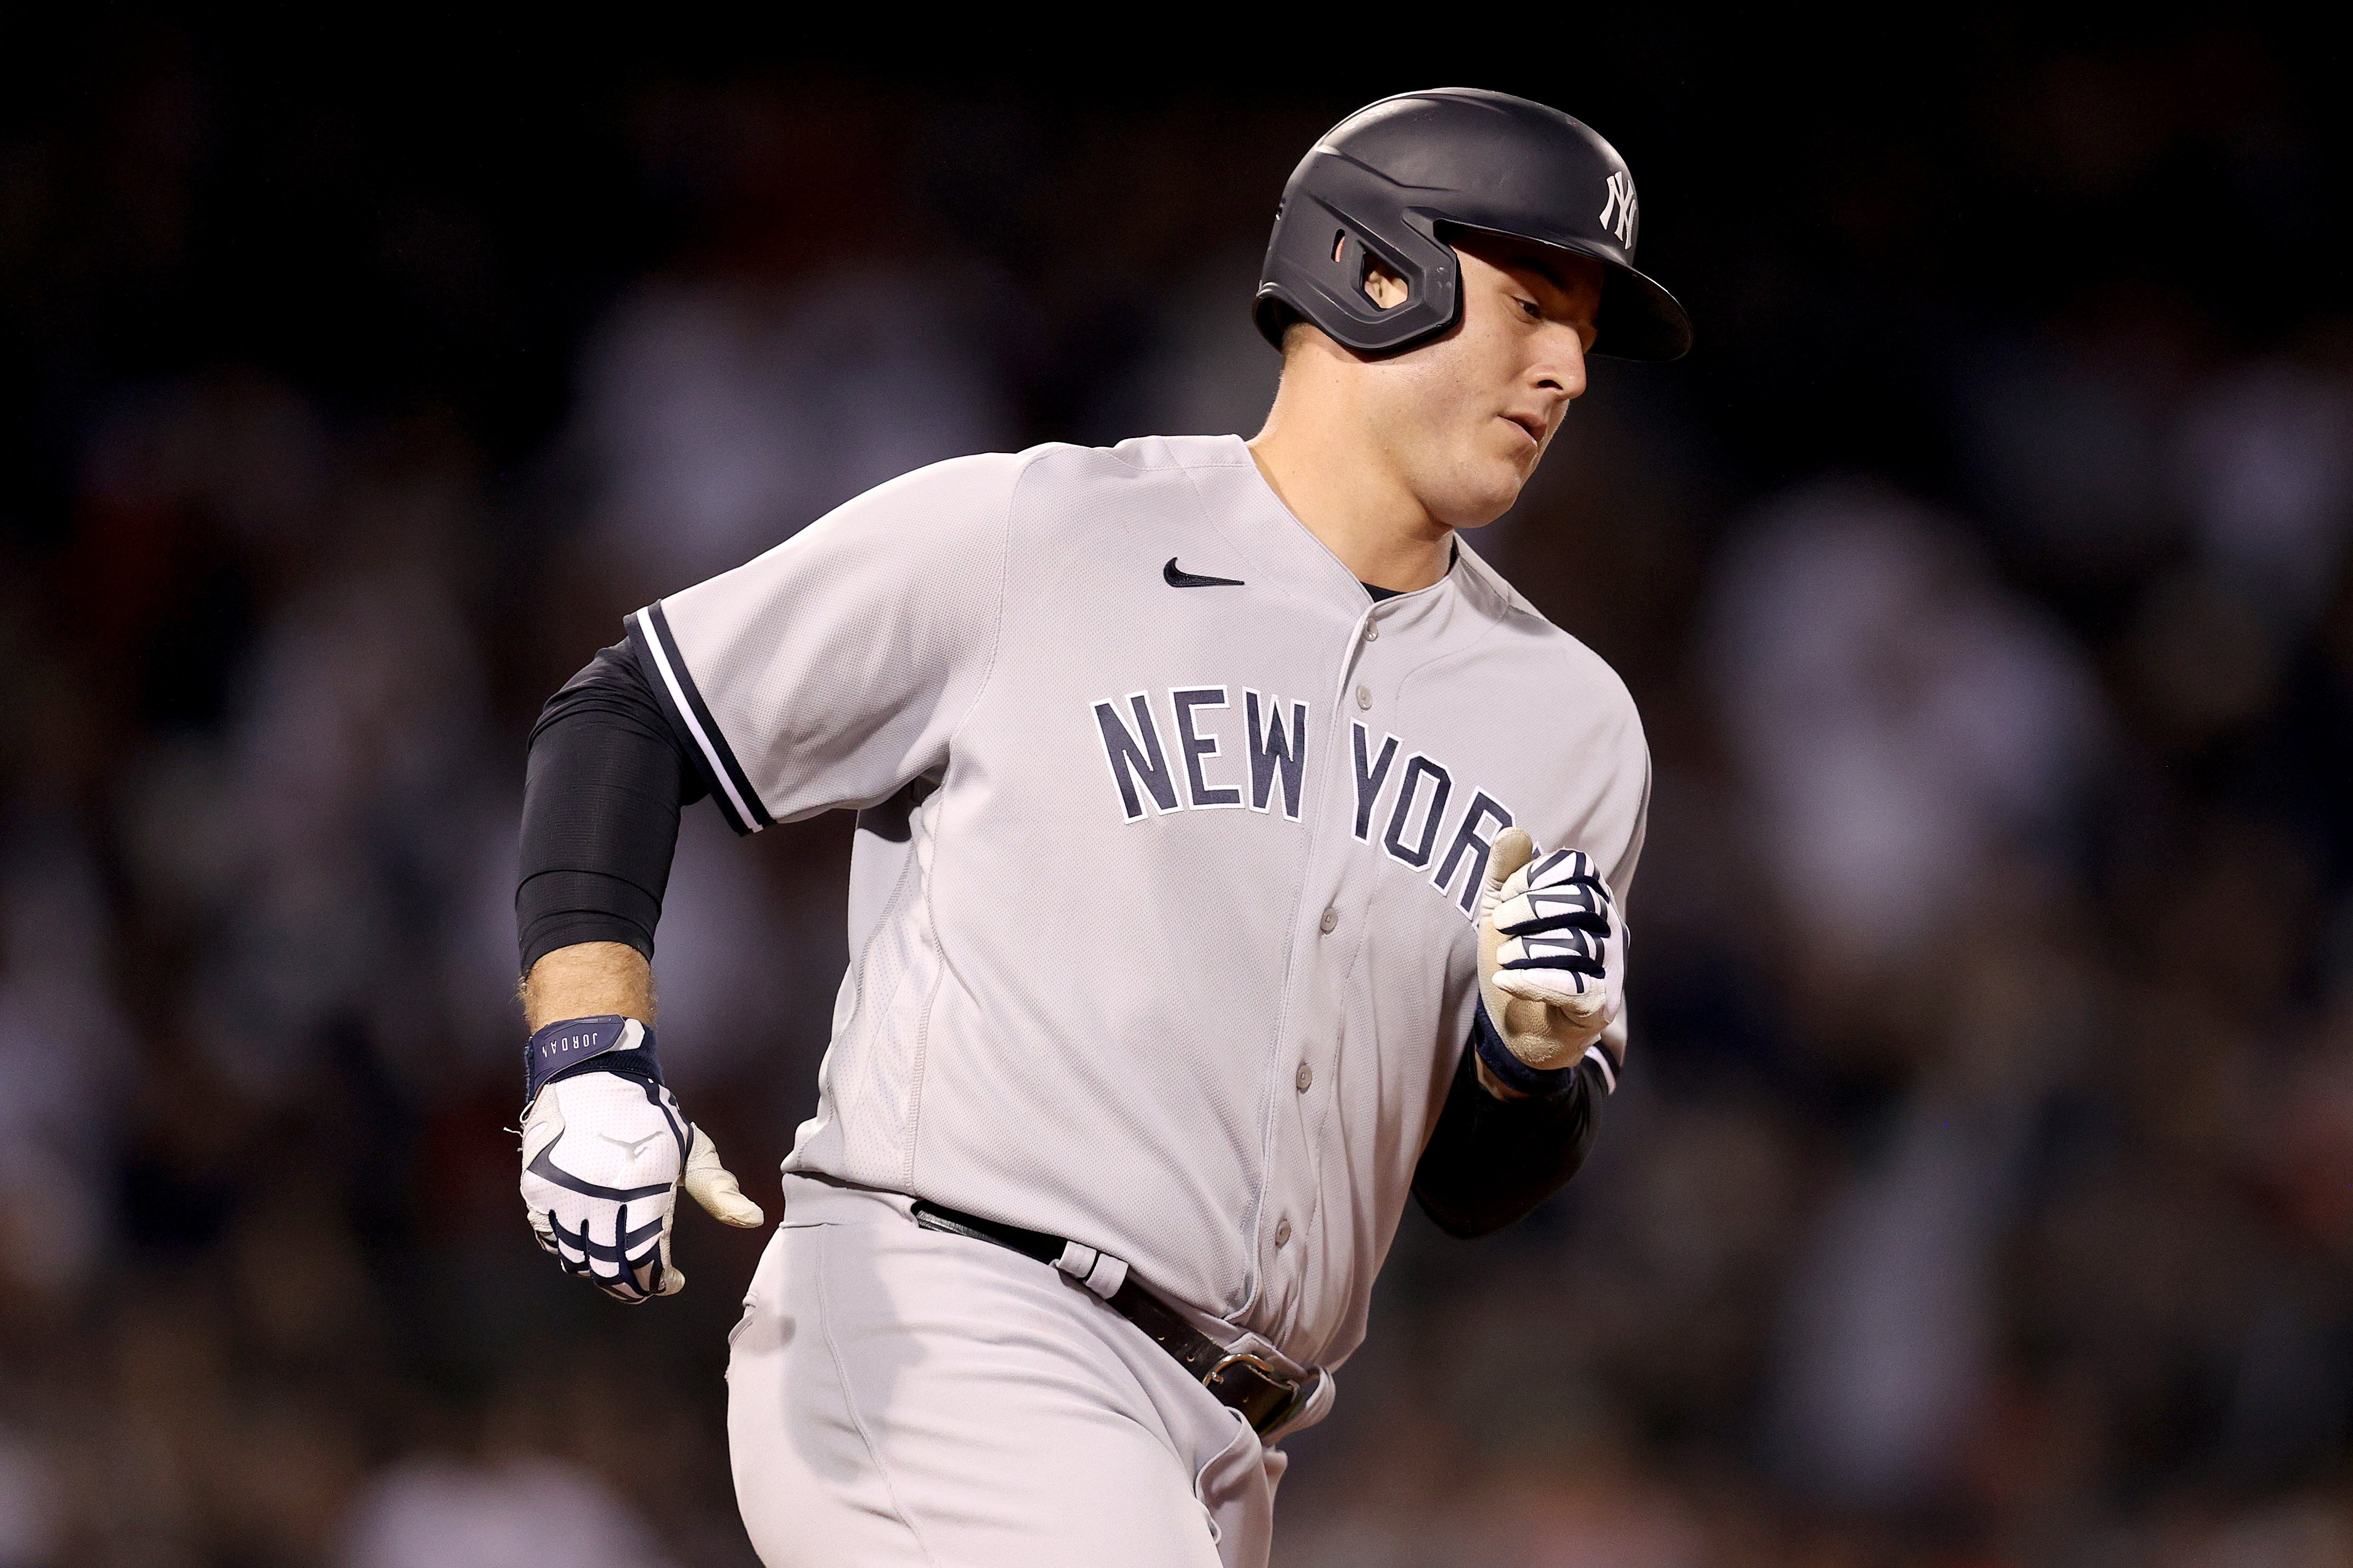 Yankees place Anthony Rizzo on IL with “likely” concussion - Pinstripe Alley